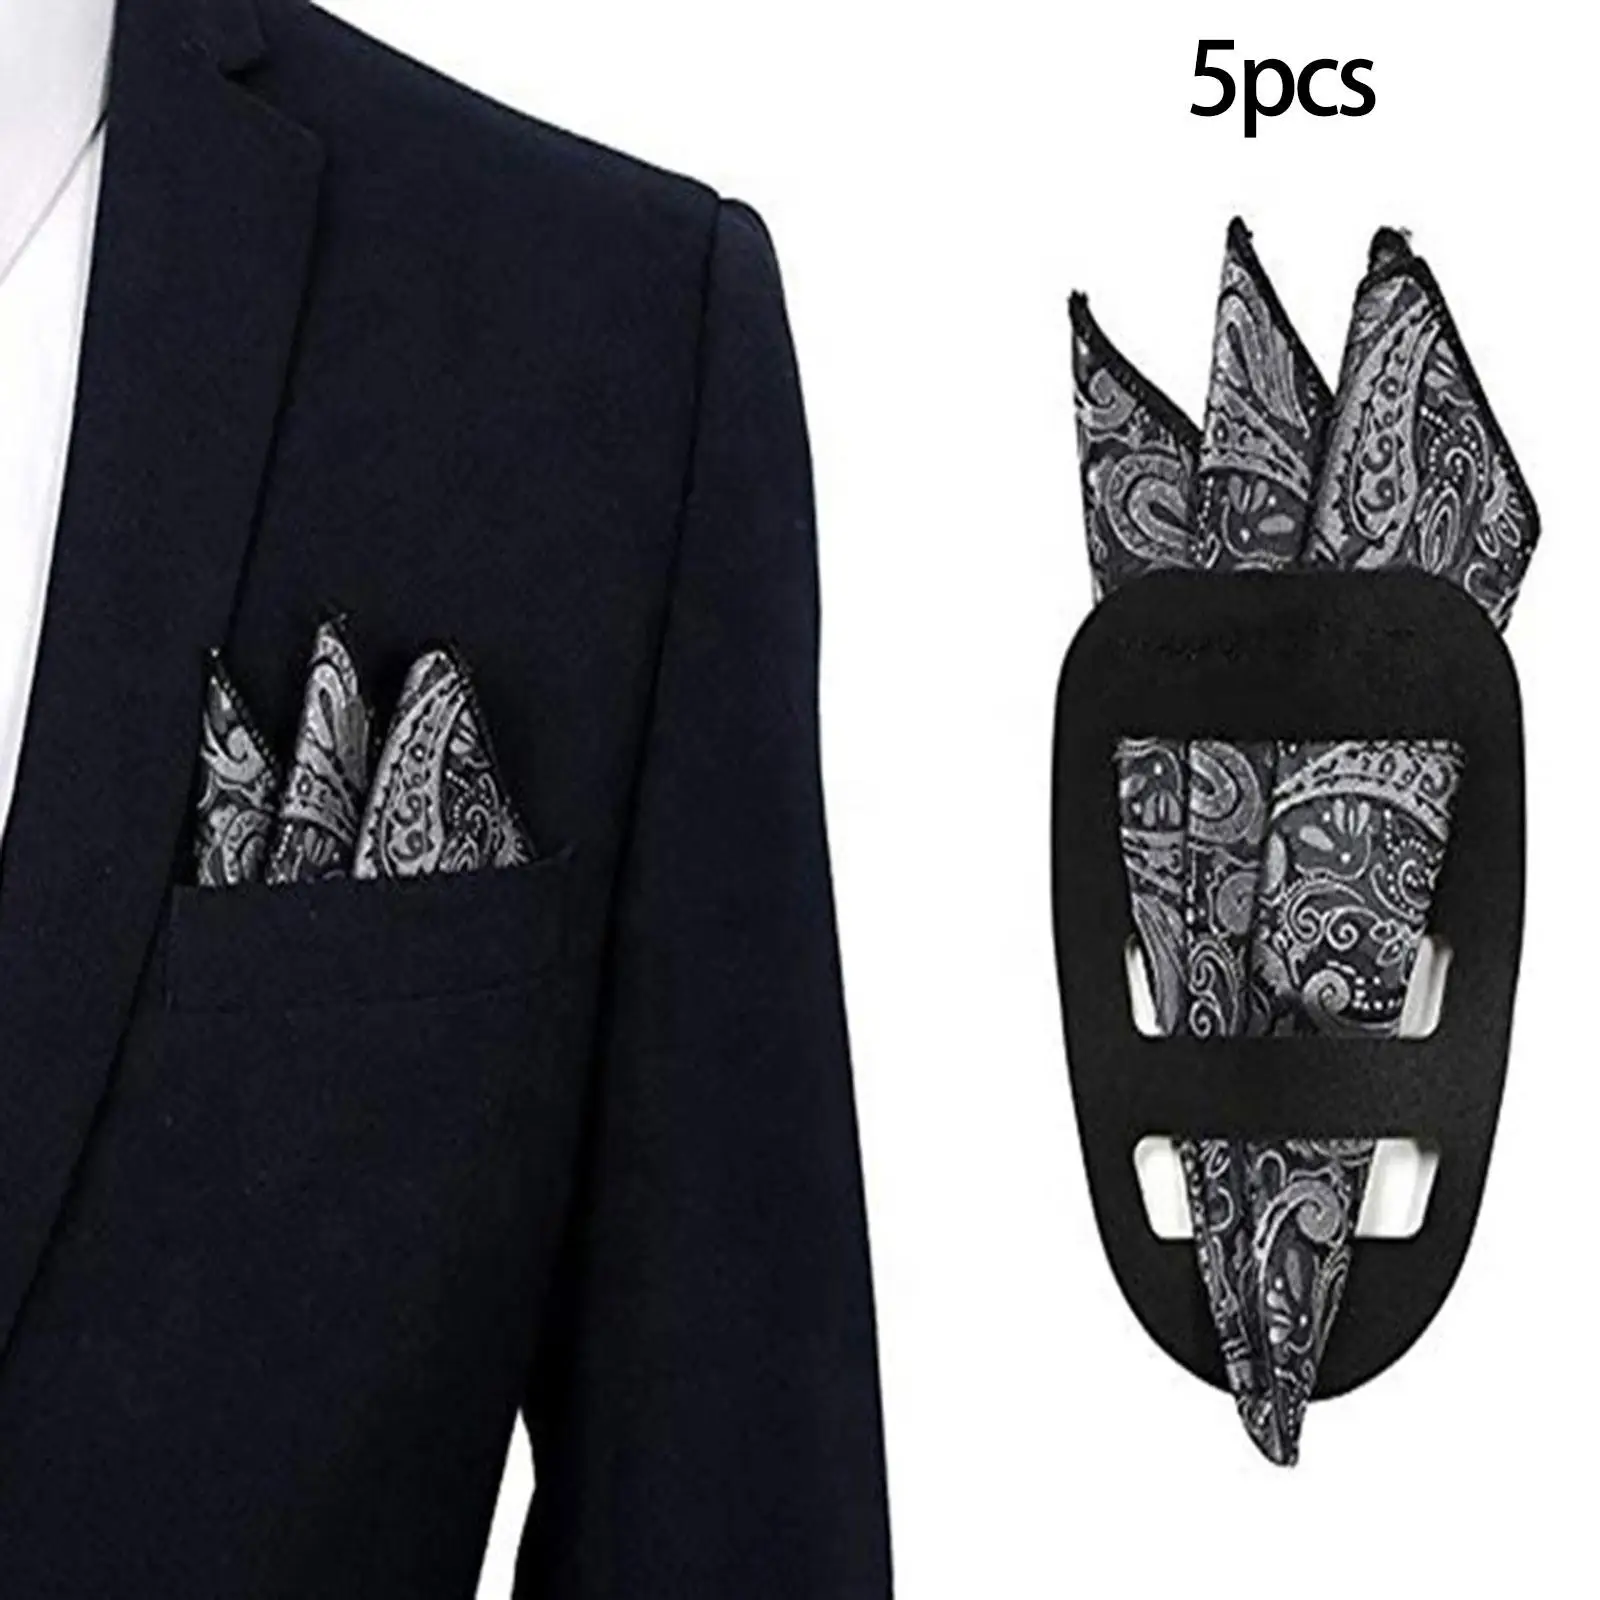 5 Pieces Pocket Square Holder Square Scarf Holder for MenS suits Jackets